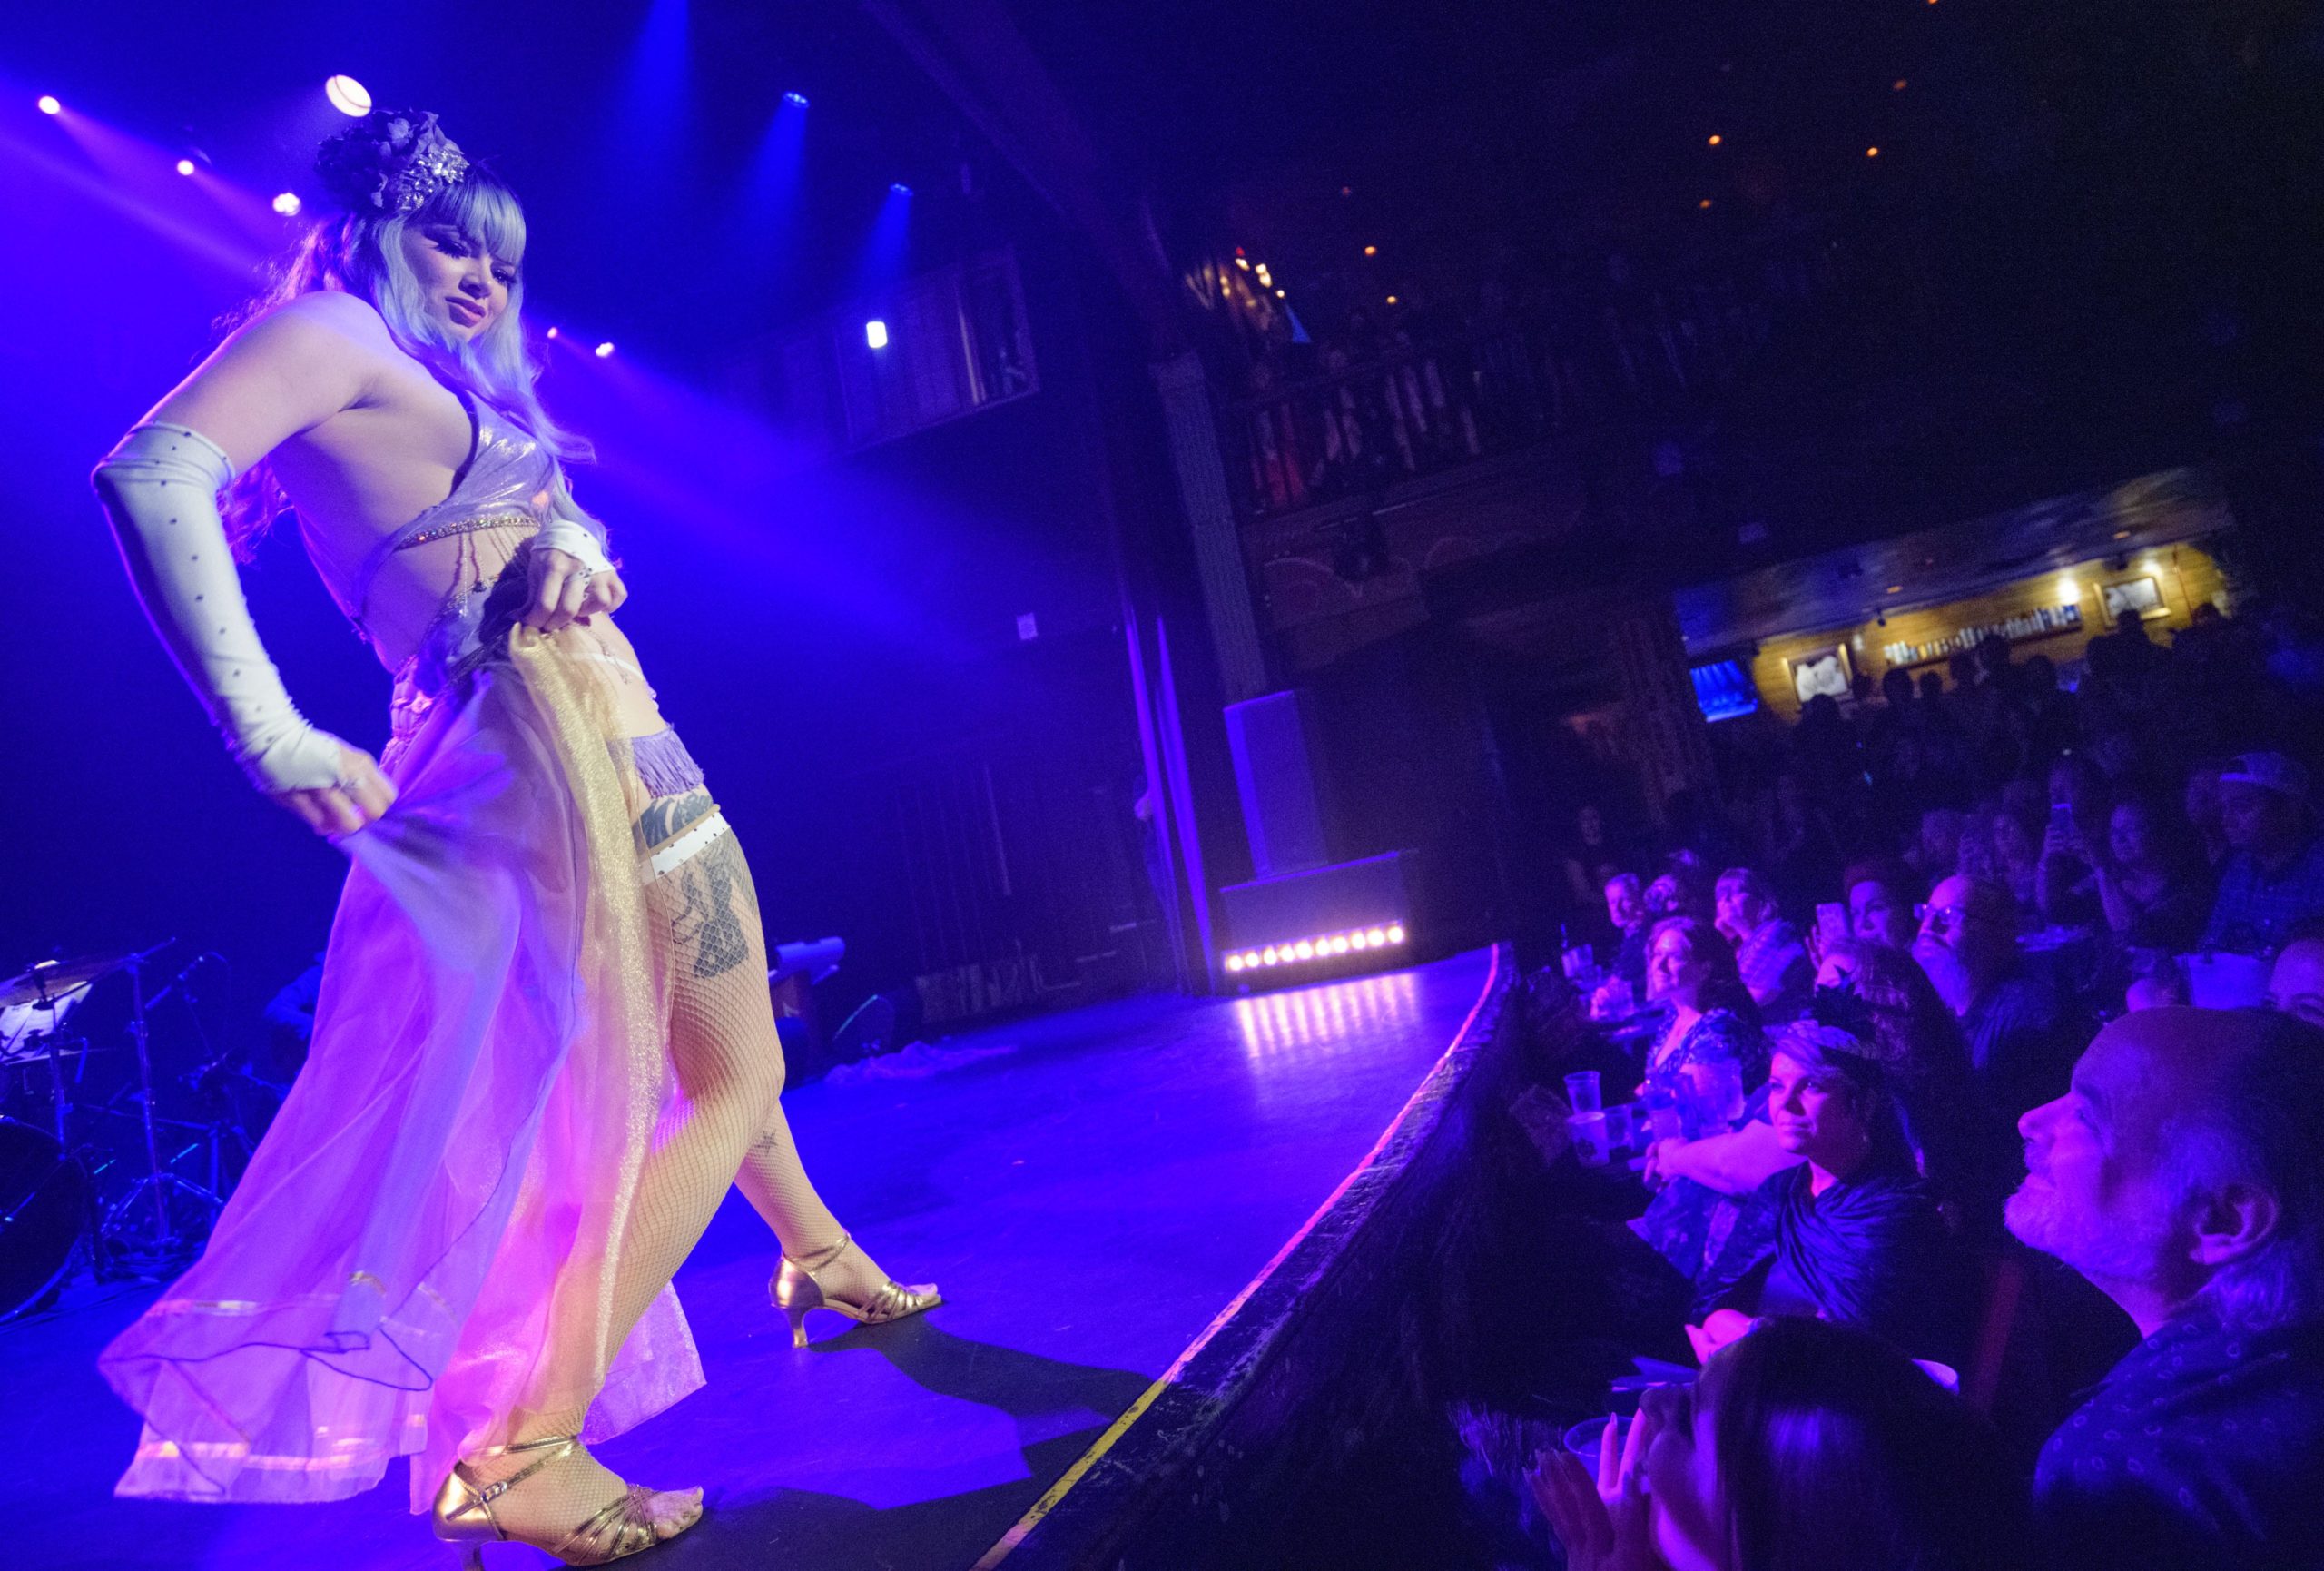 New Orleans resident and burlesque dancer Harper Hexx, which is her stage name, performs in the 2019 Queen of Burlesque competition during the 11th annual New Orleans Burlesque Festival at the House of Blues Saturday, September 14, 2019. The festival last three days with burlesque and other performers including escape artists, tap dancers, comedians and magicians. The main event invites burlesque dancers from around the world to perform to the music of a live jazz band and the chance to be crowned Queen at the end of the night. Hexx finished as the second runner-up to Albadoro Gala, a burlesque dancer from Italy. Hexx began as an exotic dancer on Bourbon Street at age 19 and said the first time she took her top off on stage she got a feeling of pure adrenaline. She has had her ups and downs since then dancing in the French Quarter. She is a recovering alcoholic and says one of her low points was falling down drunk. Now she uses mediation and yoga to help keep her mind clear. She recently joined Bustout Burlesque created by Rick Delaup, who also runs the festival, and has rededicated herself to learn more about the art and history of burlesque dancing including meeting Kitty West, also known as Evangeline the Oyster Girl, before she passed this year. Harper Hexx performs as least once a week and feels that dancing, like her mediations, keeps her centered. Other performers in the competition include dancers Queen Etouffante, Petit Cheire, Demi Dior, Sheila Shortcake, Lil Steph, and singer Naydja CoJoe. Photo by Matthew Hinton